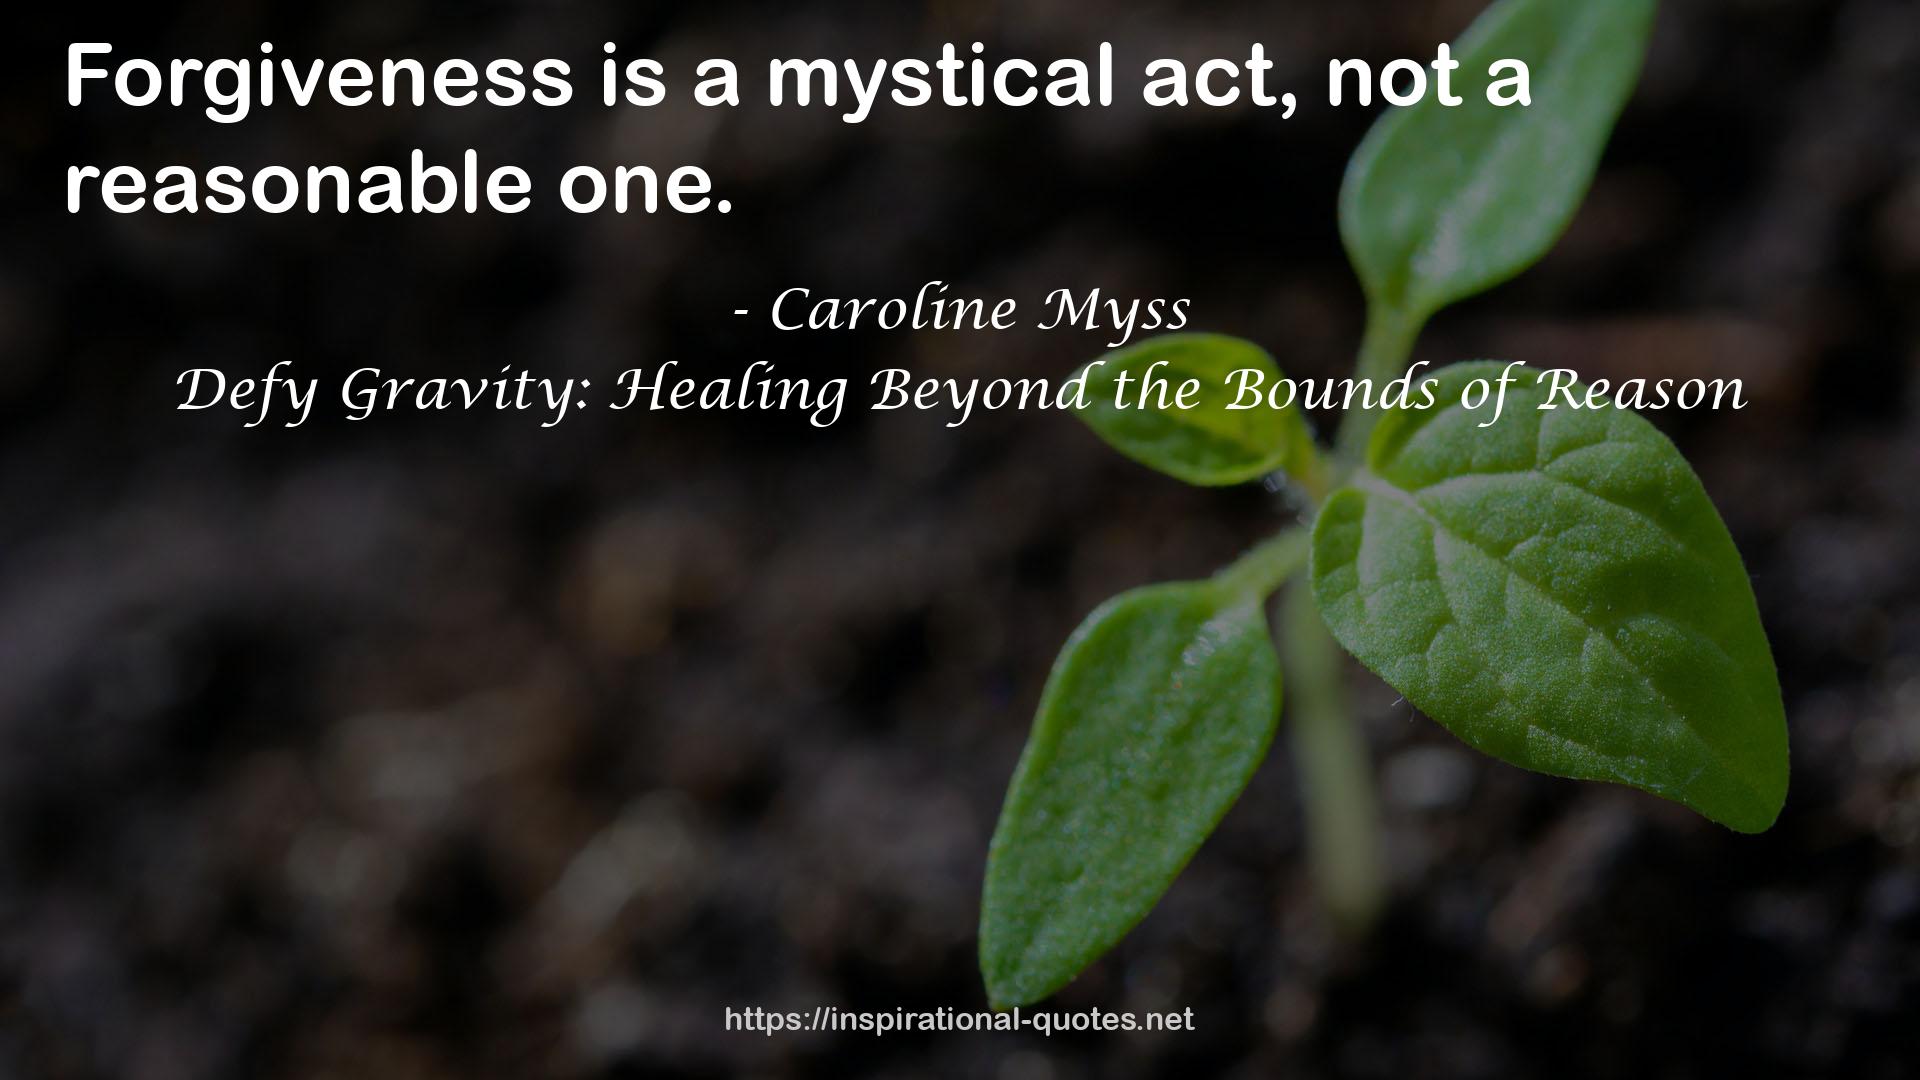 Defy Gravity: Healing Beyond the Bounds of Reason QUOTES